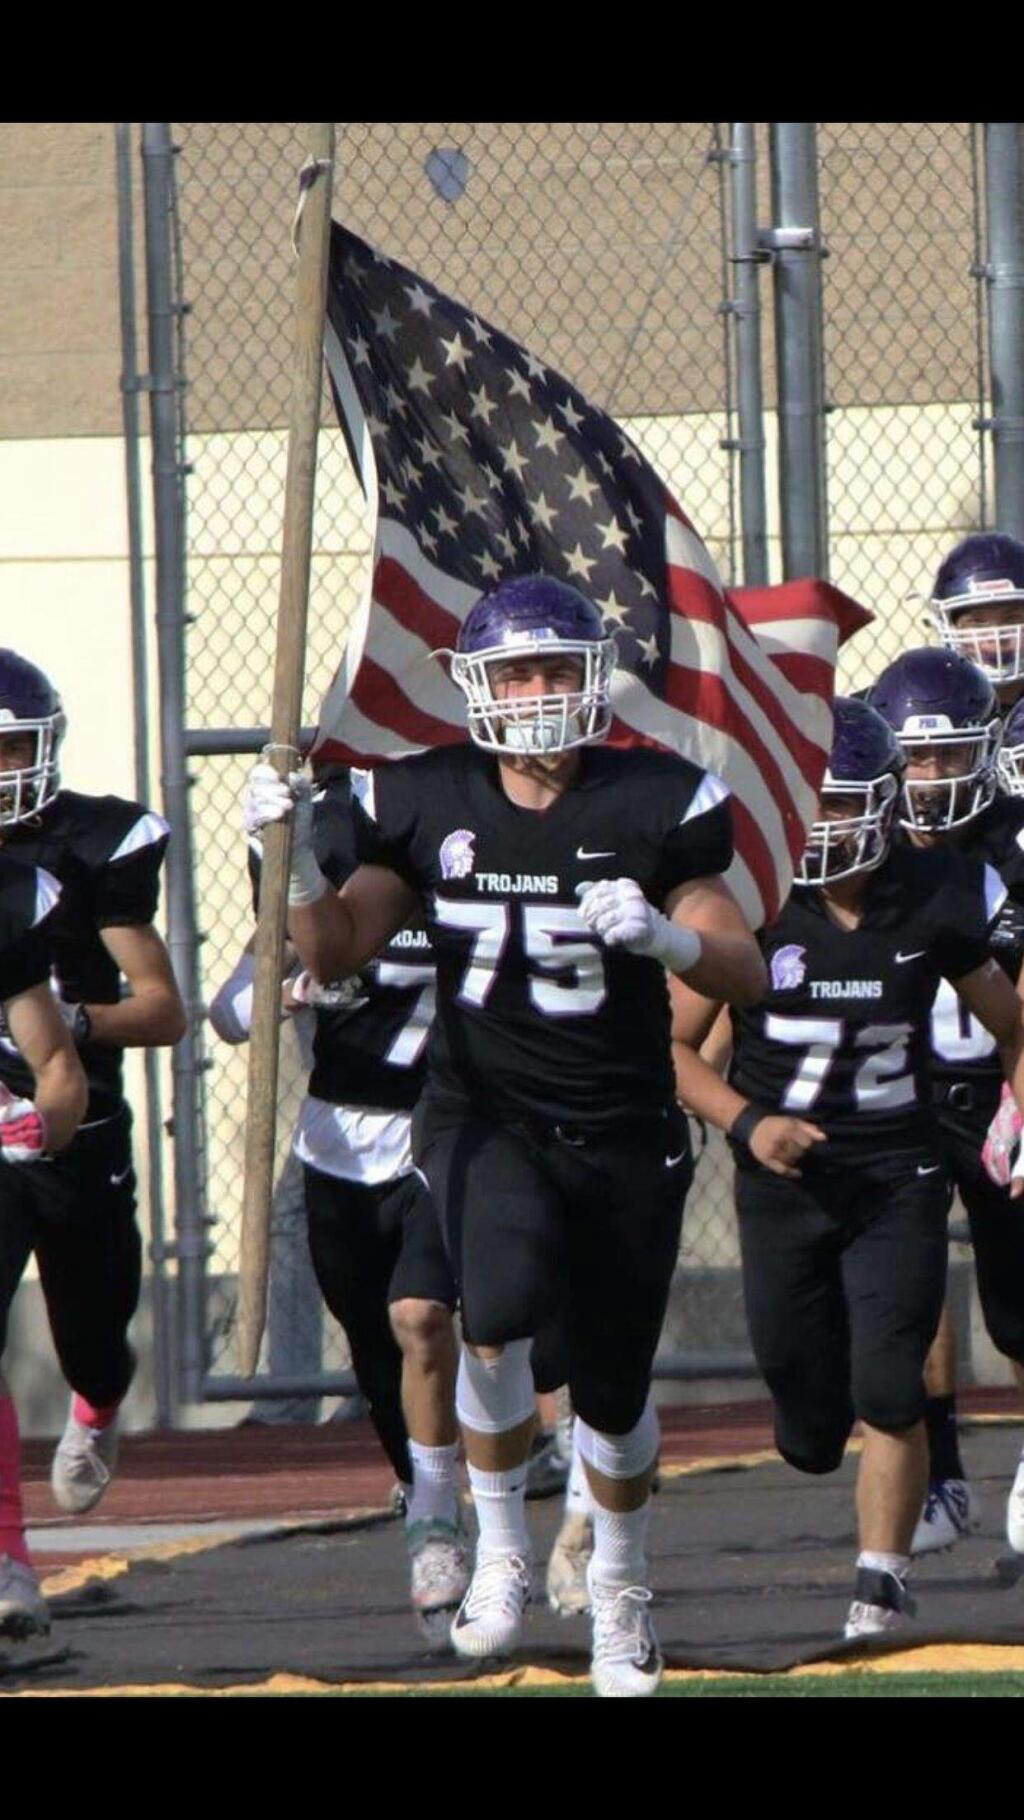 SUBMITTED PHOTONick Siembieda (No. 75) leads Petaluma High's Trojans onto the field. The senior two-way All-League lineman has been nominated to four military service academies.